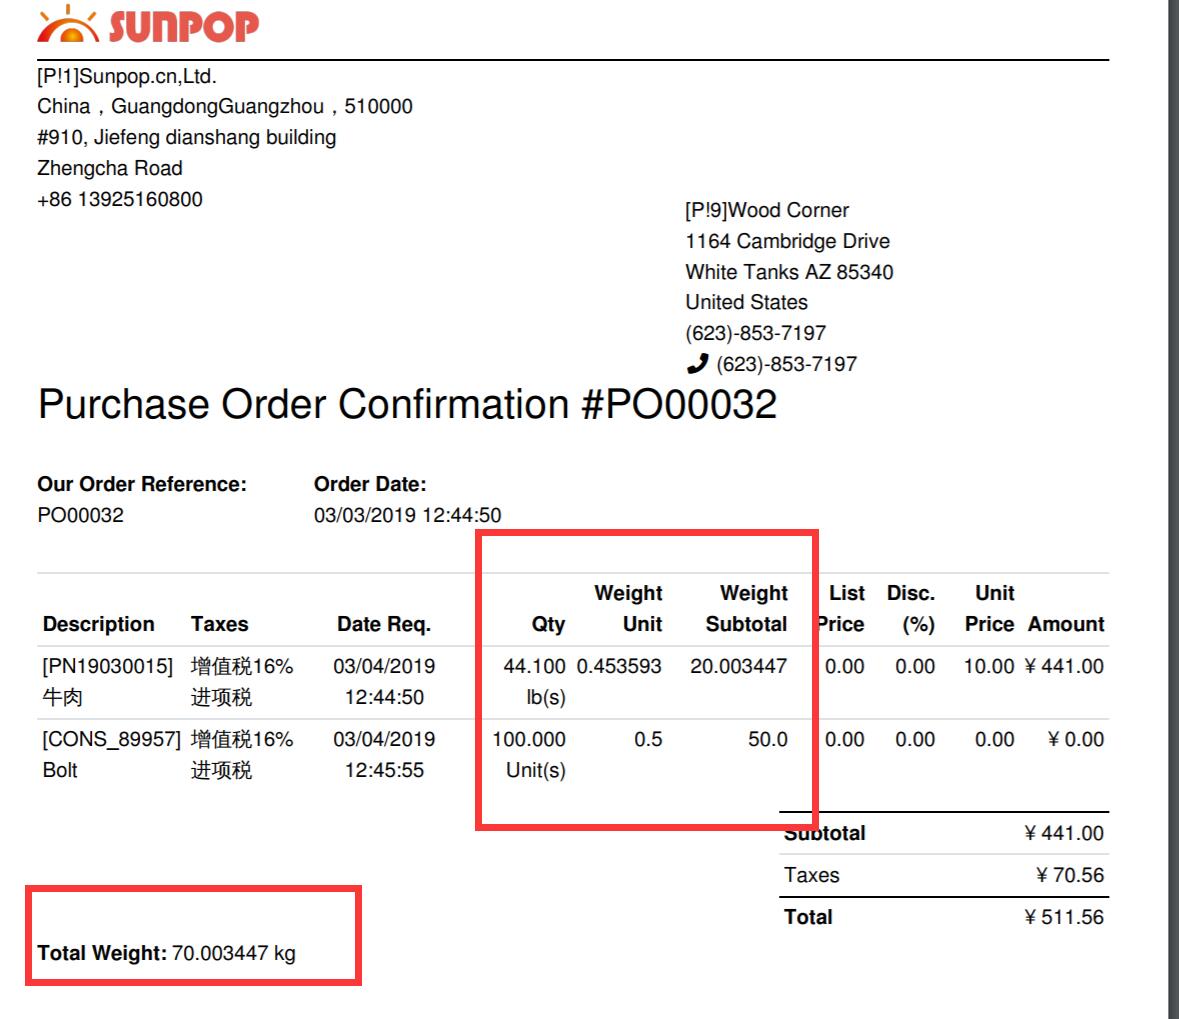 Purchase Order Weight